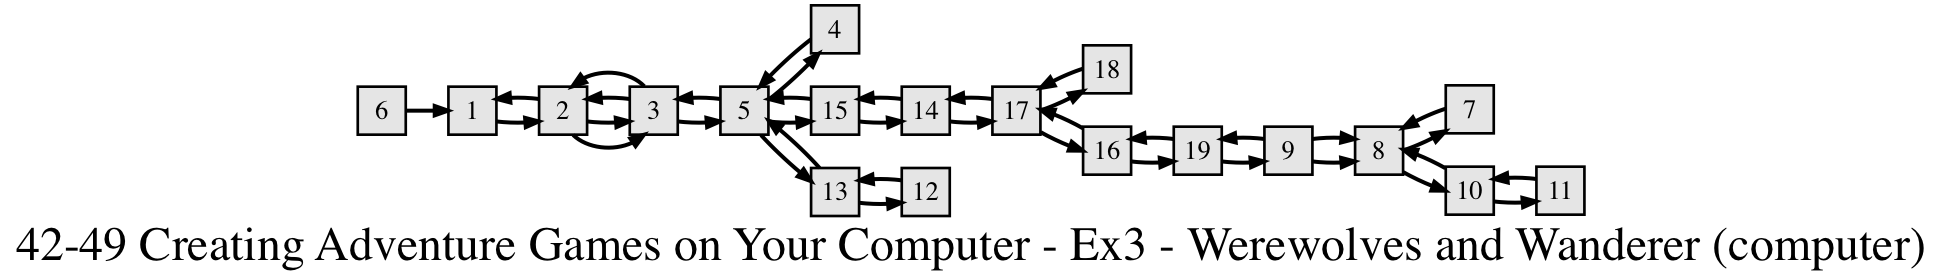 network graph image